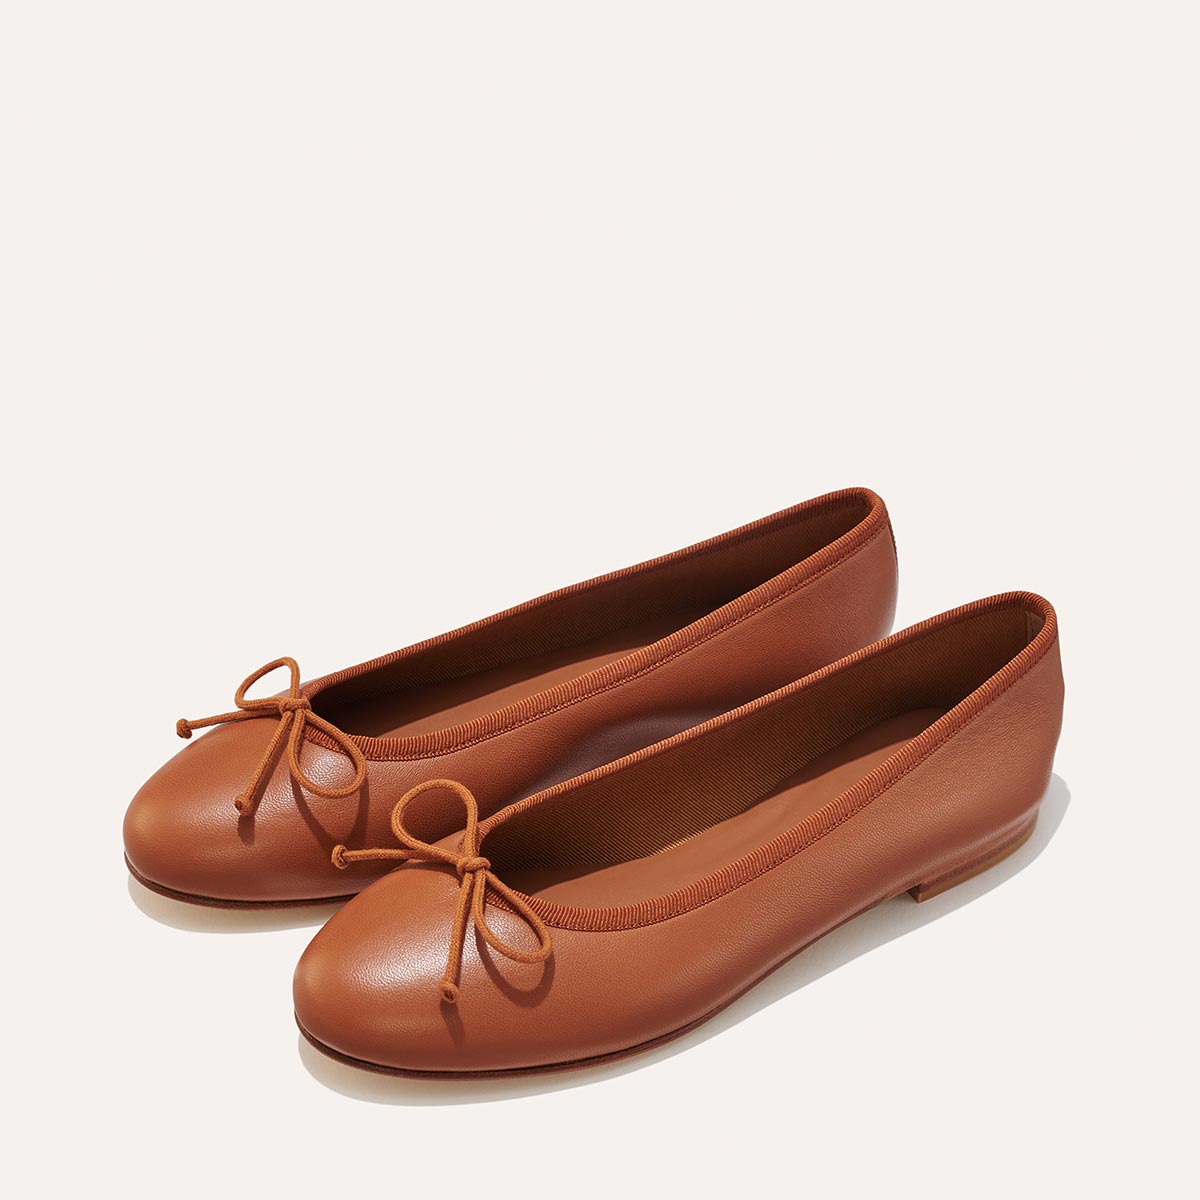 Margaux's classic and comfortable Demi ballet flat, made in a soft, brown Italian nappa leather 